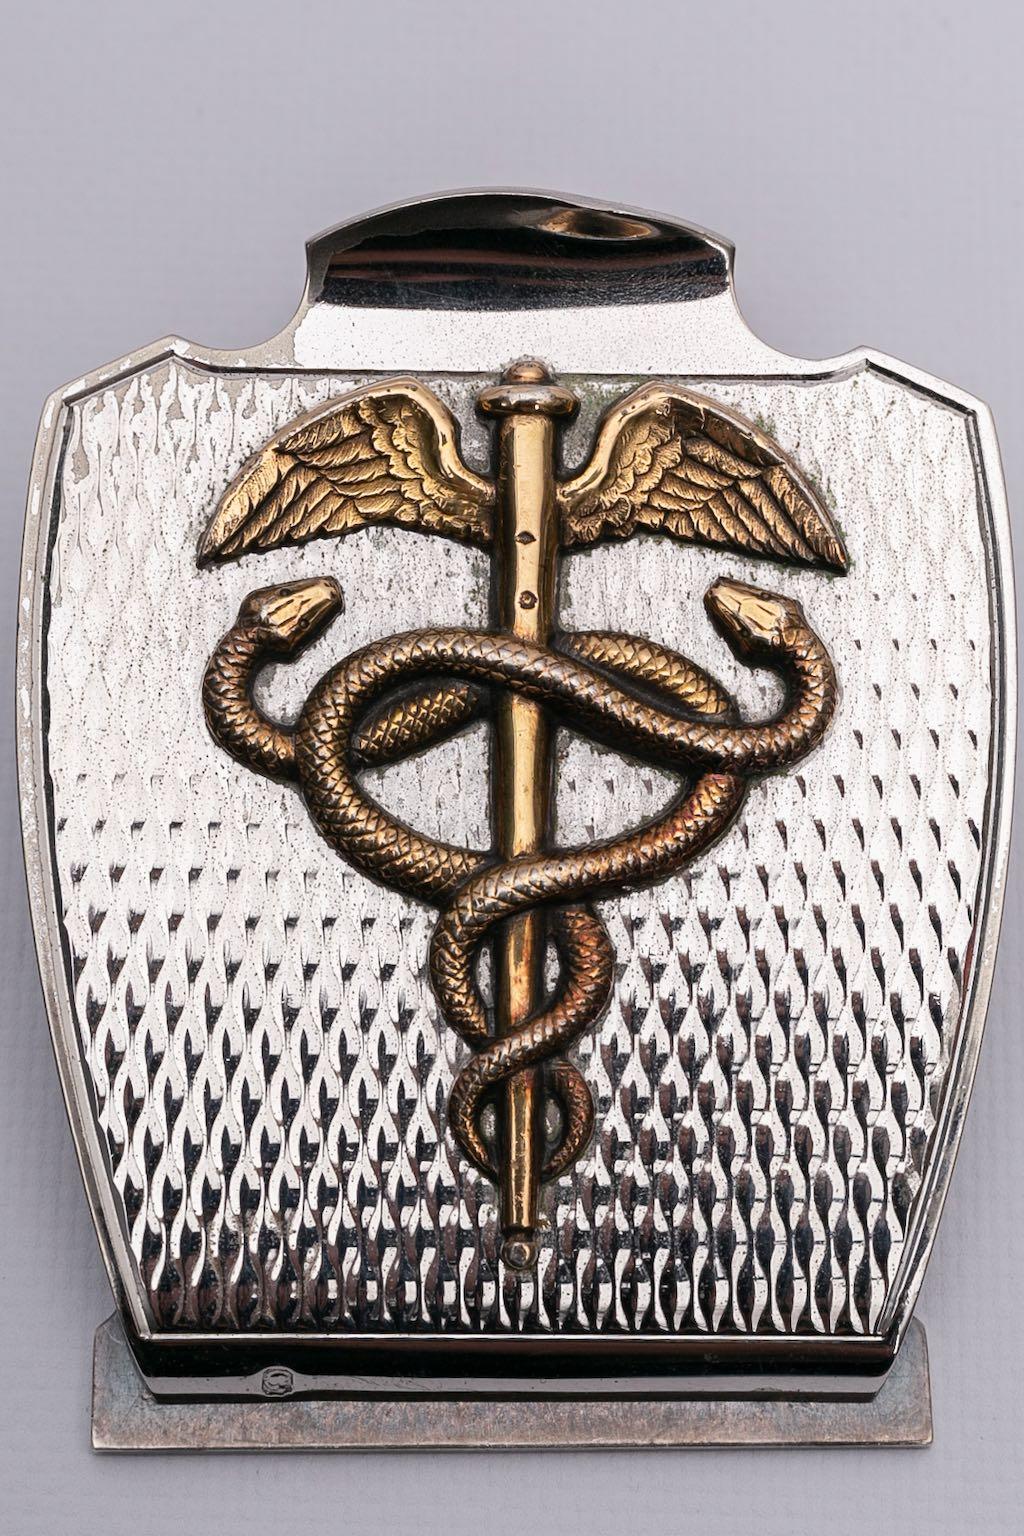 Hermes -Paperweight in solid silver representing a caduceus.

Additional information: 
Dimensions: Length: 10 cm (3.93